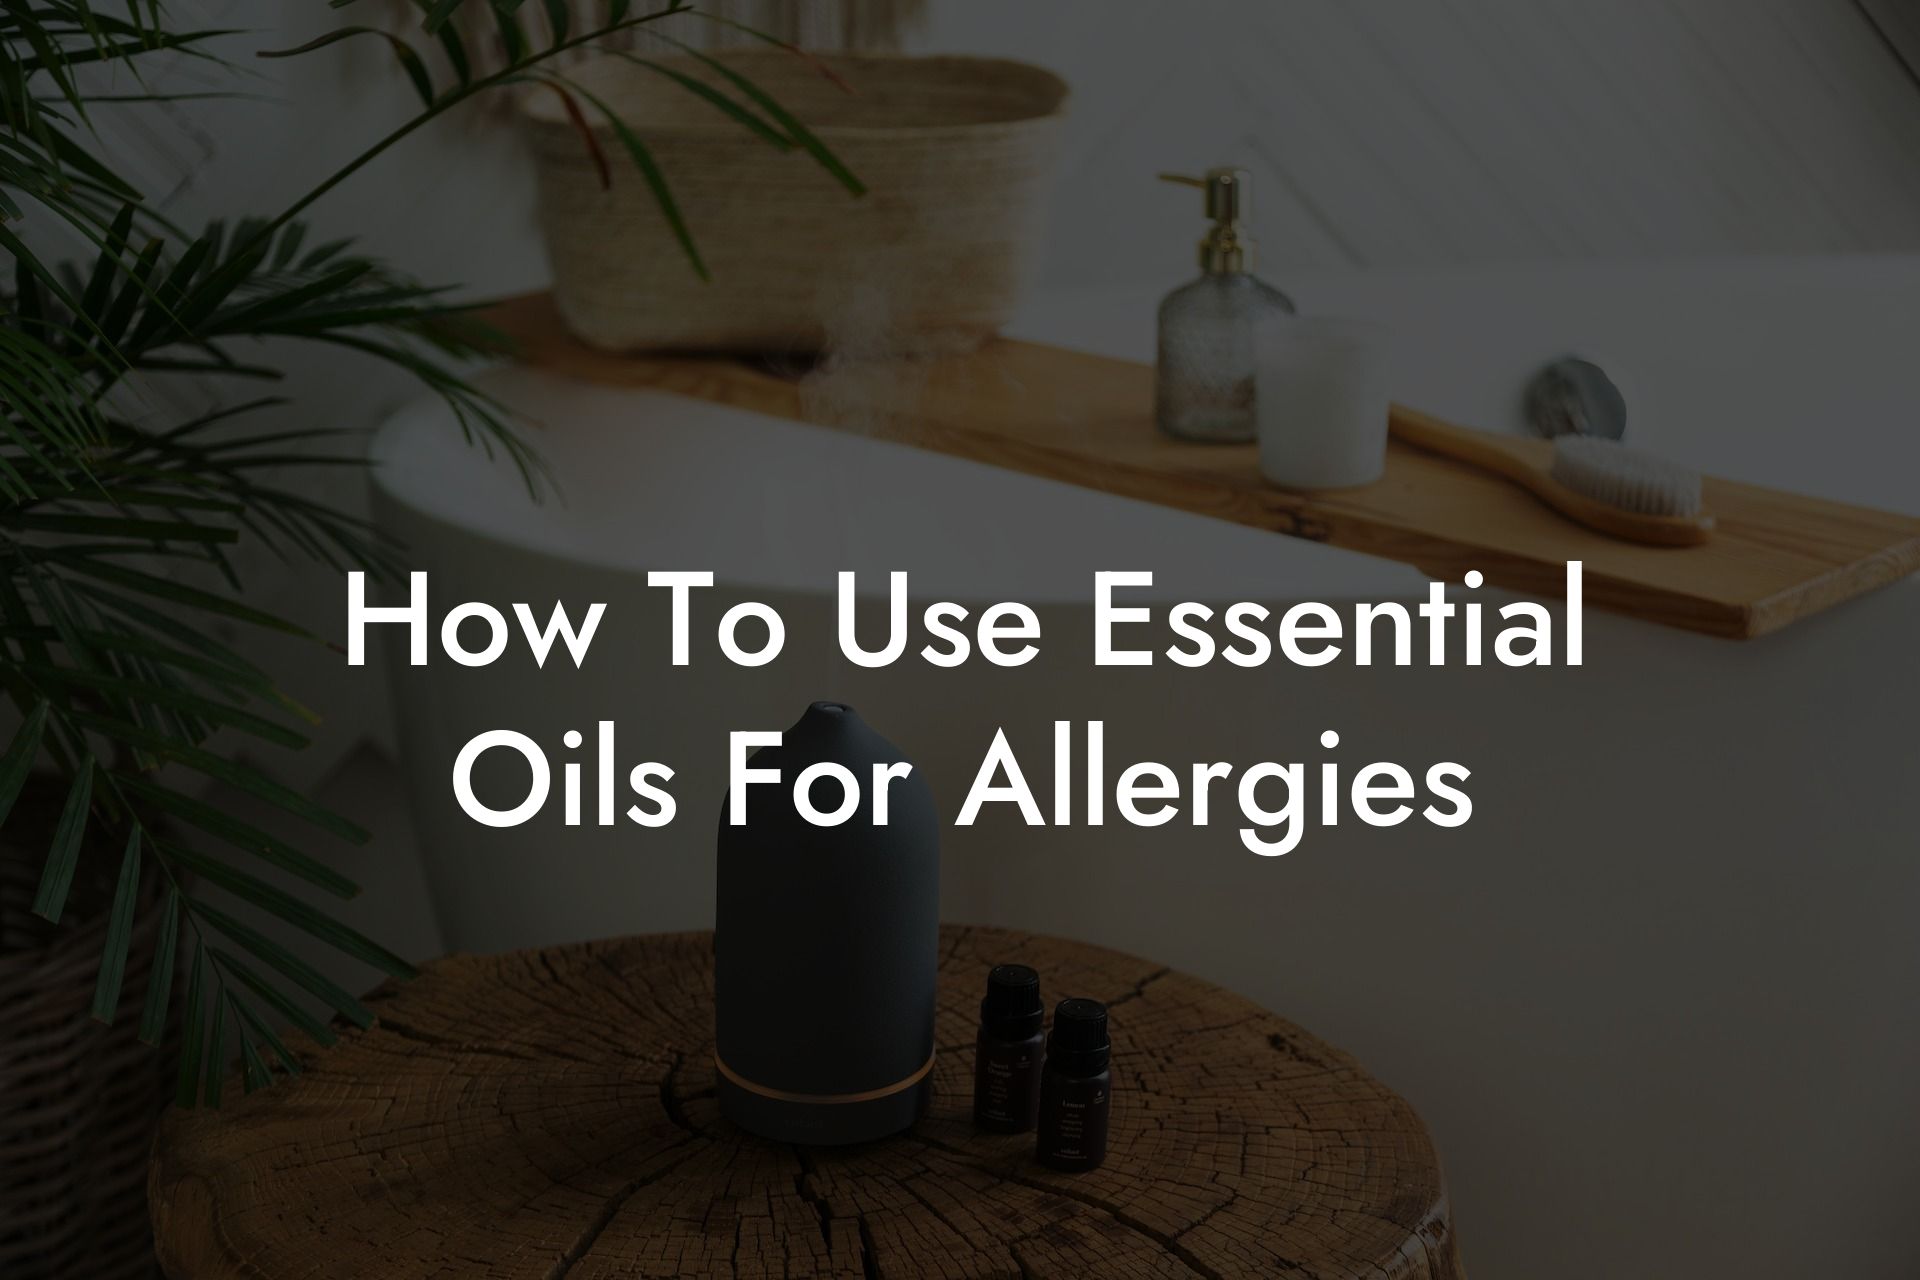 How To Use Essential Oils For Allergies